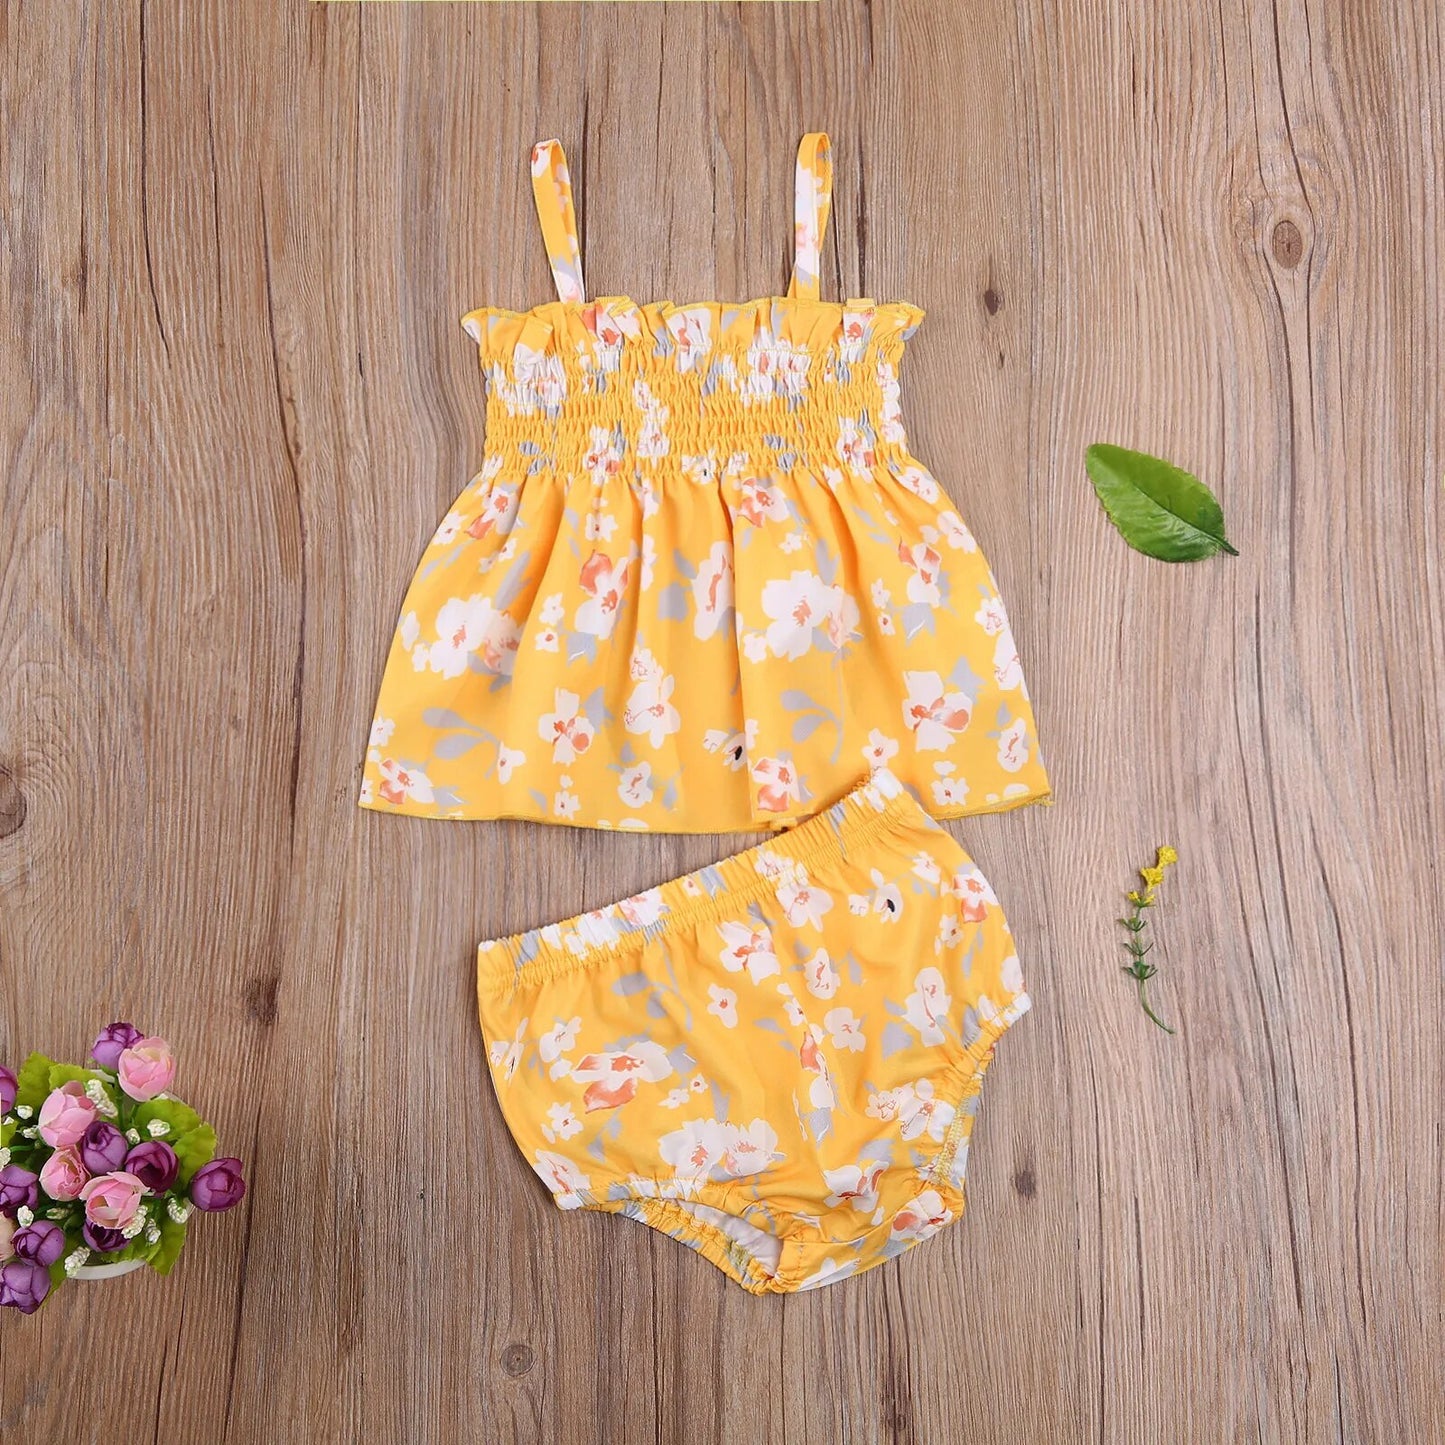 0-24M  Newborn Baby Girls Fashion 2-piece Outfit Set Sleeveless Floral Tops+Shorts Set for Kids Girls